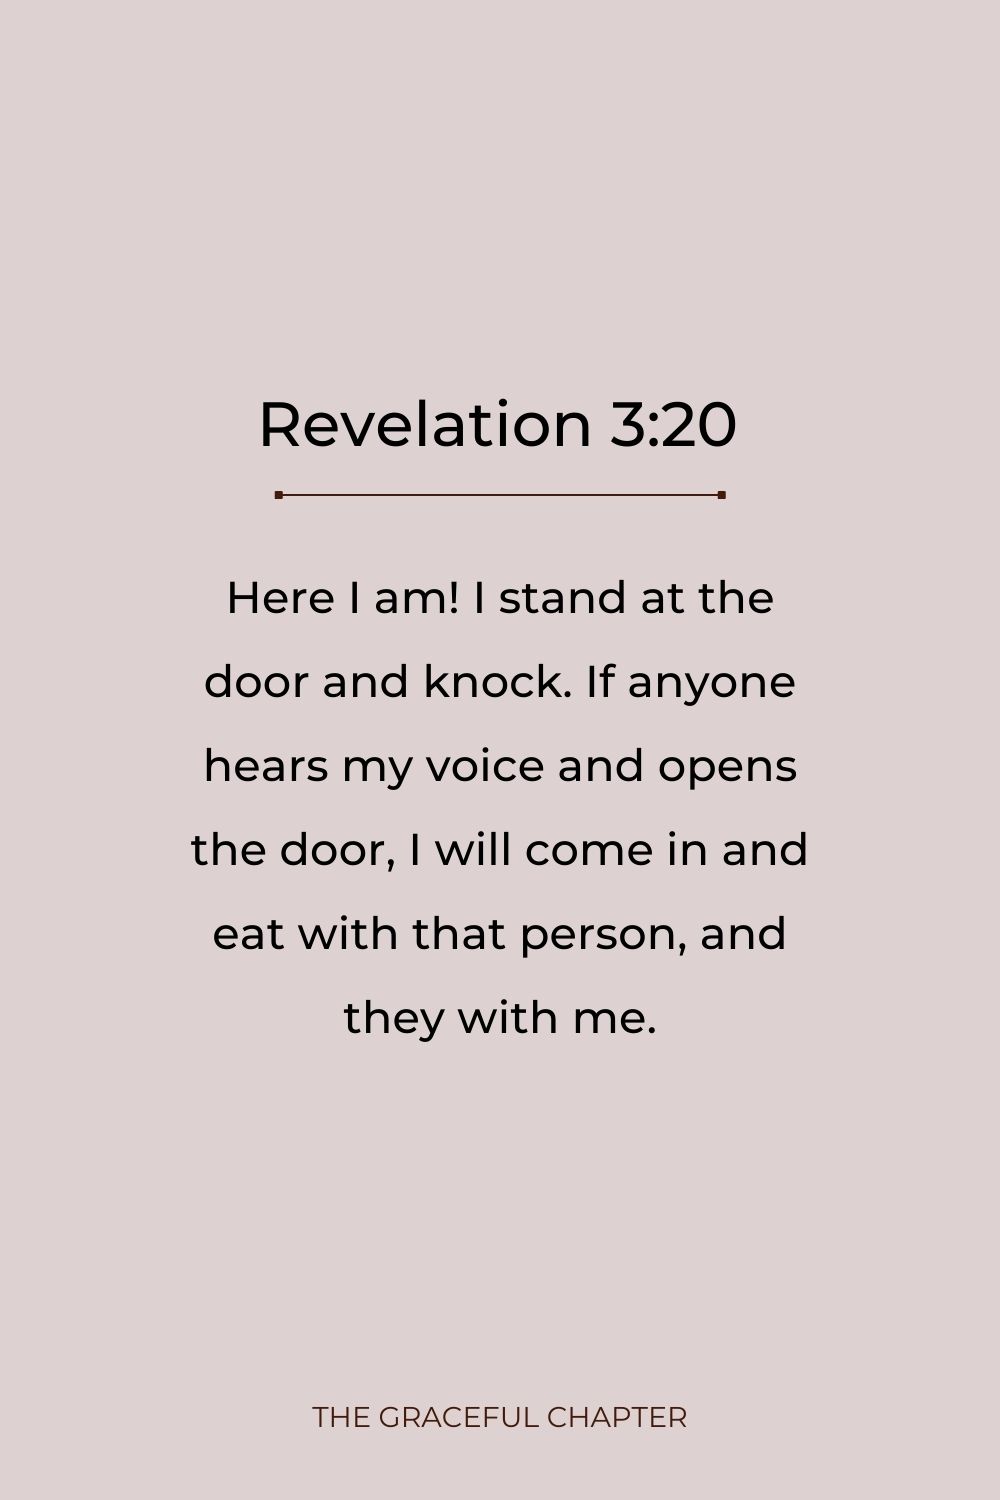 Here I am! I stand at the door and knock. If anyone hears my voice and opens the door, I will come in and eat with that person, and they with me. Revelation 3:20